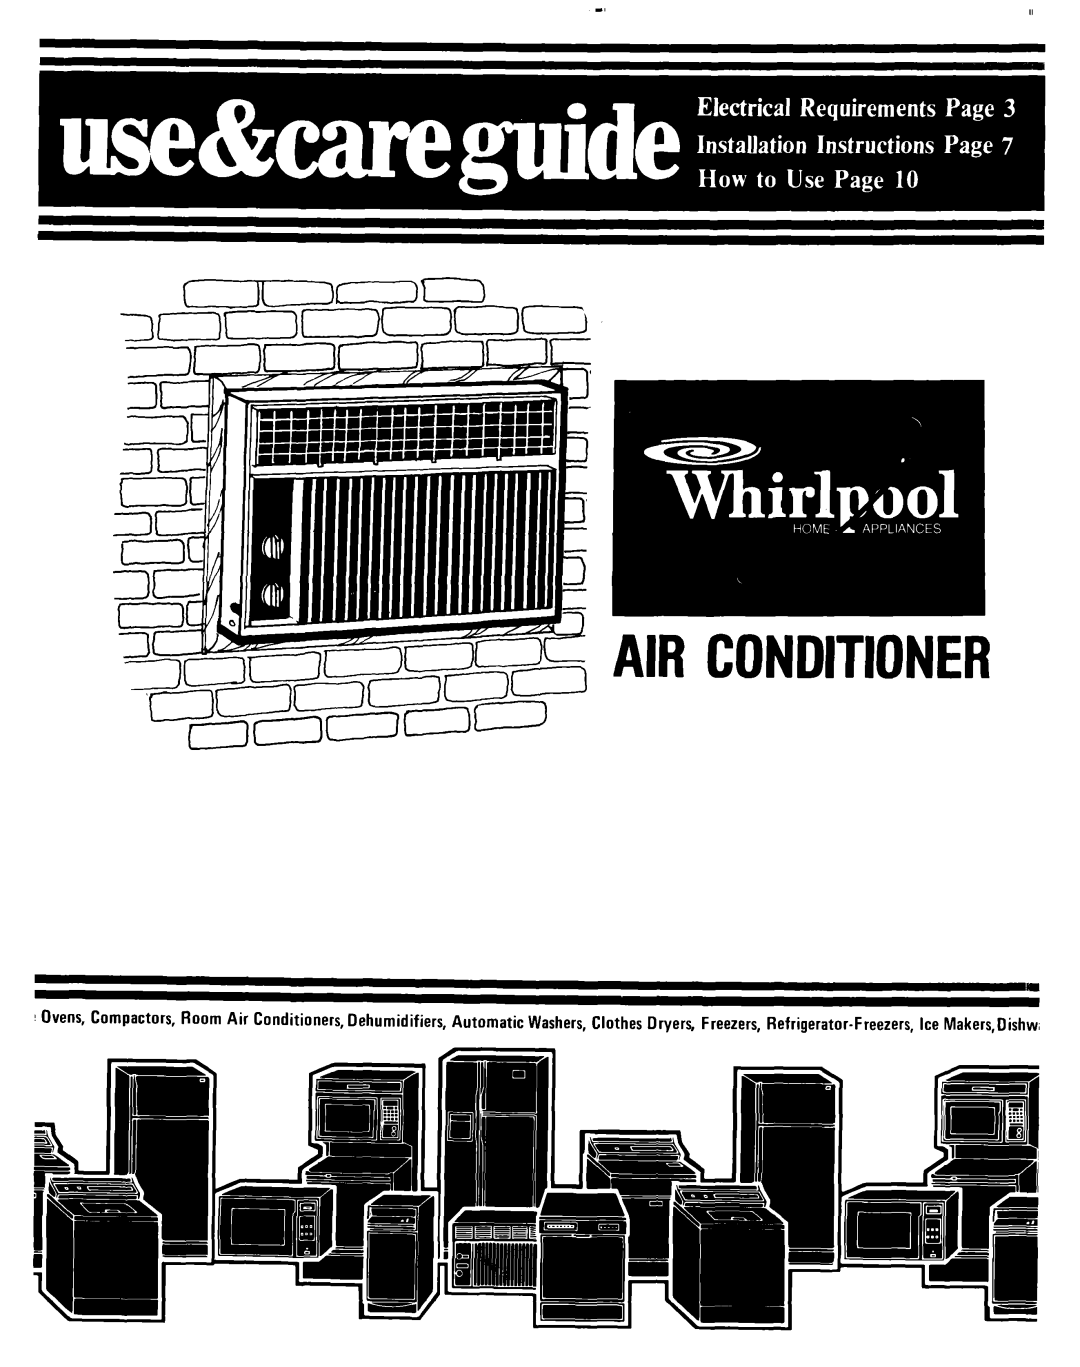 Whirlpool ACE184XM0 manual Airconditioner 